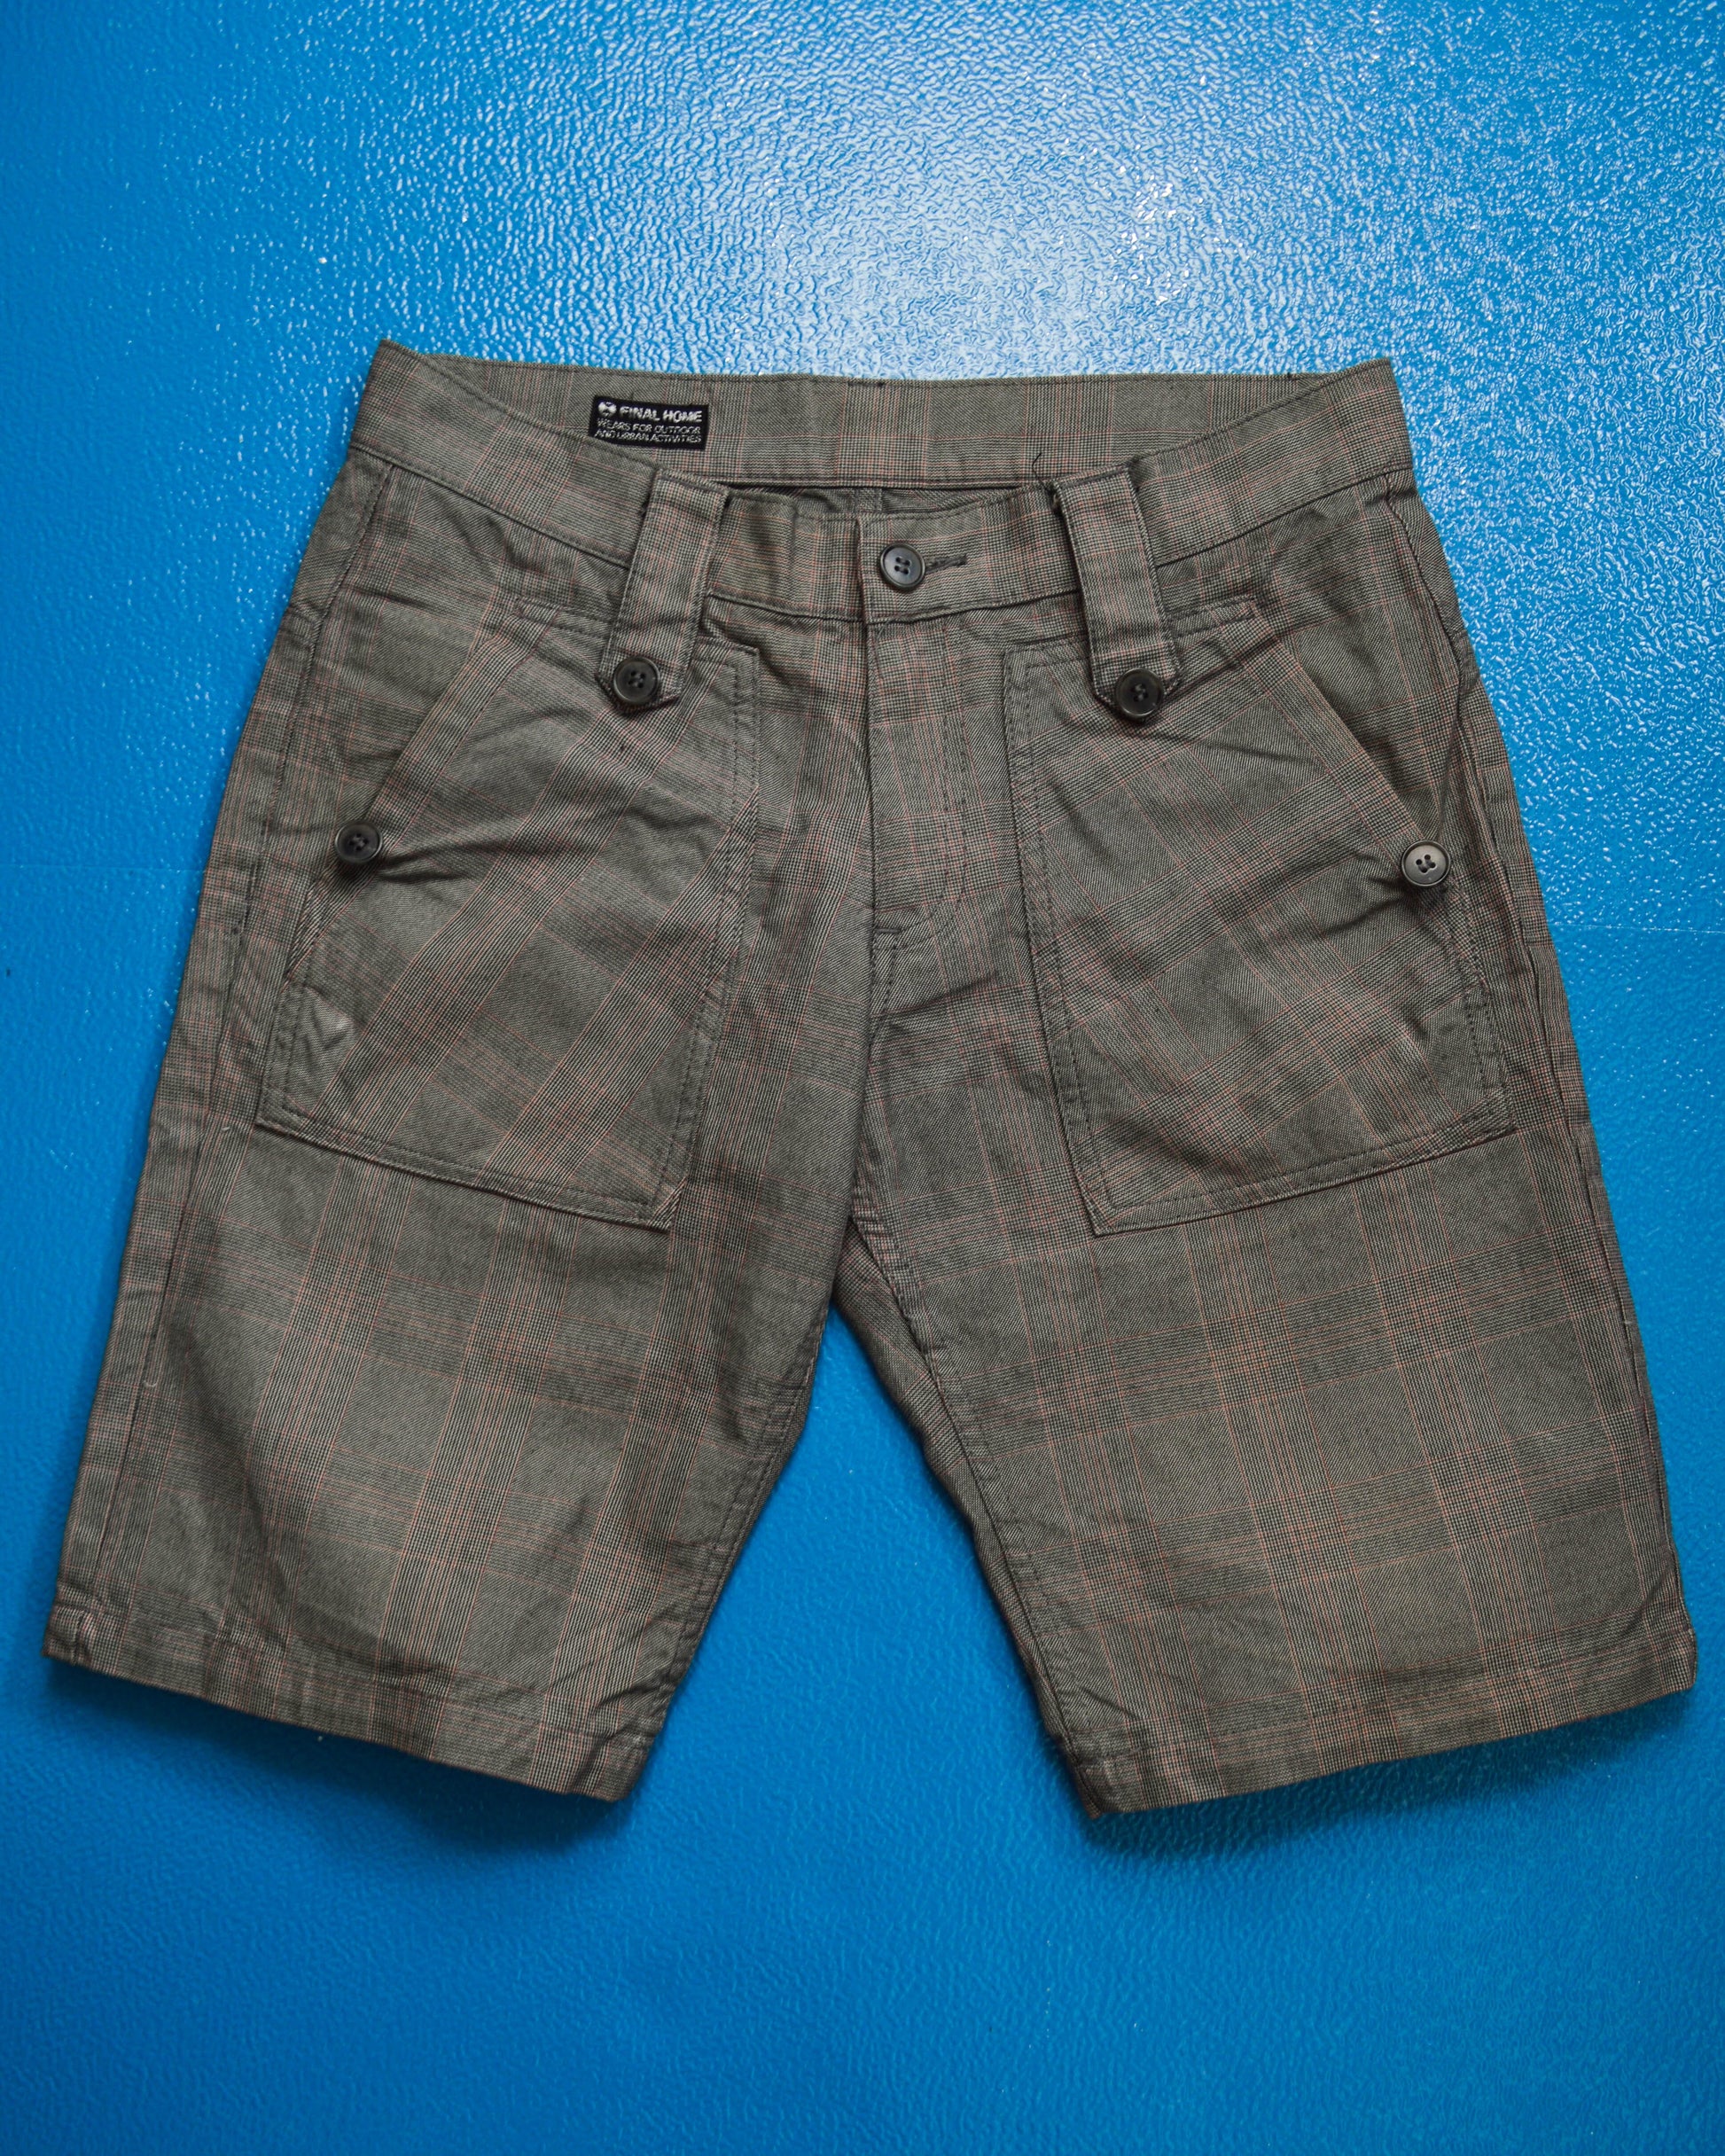 Final Home 2 in 1 Convertible Plaid Shorts Pants (28~30)